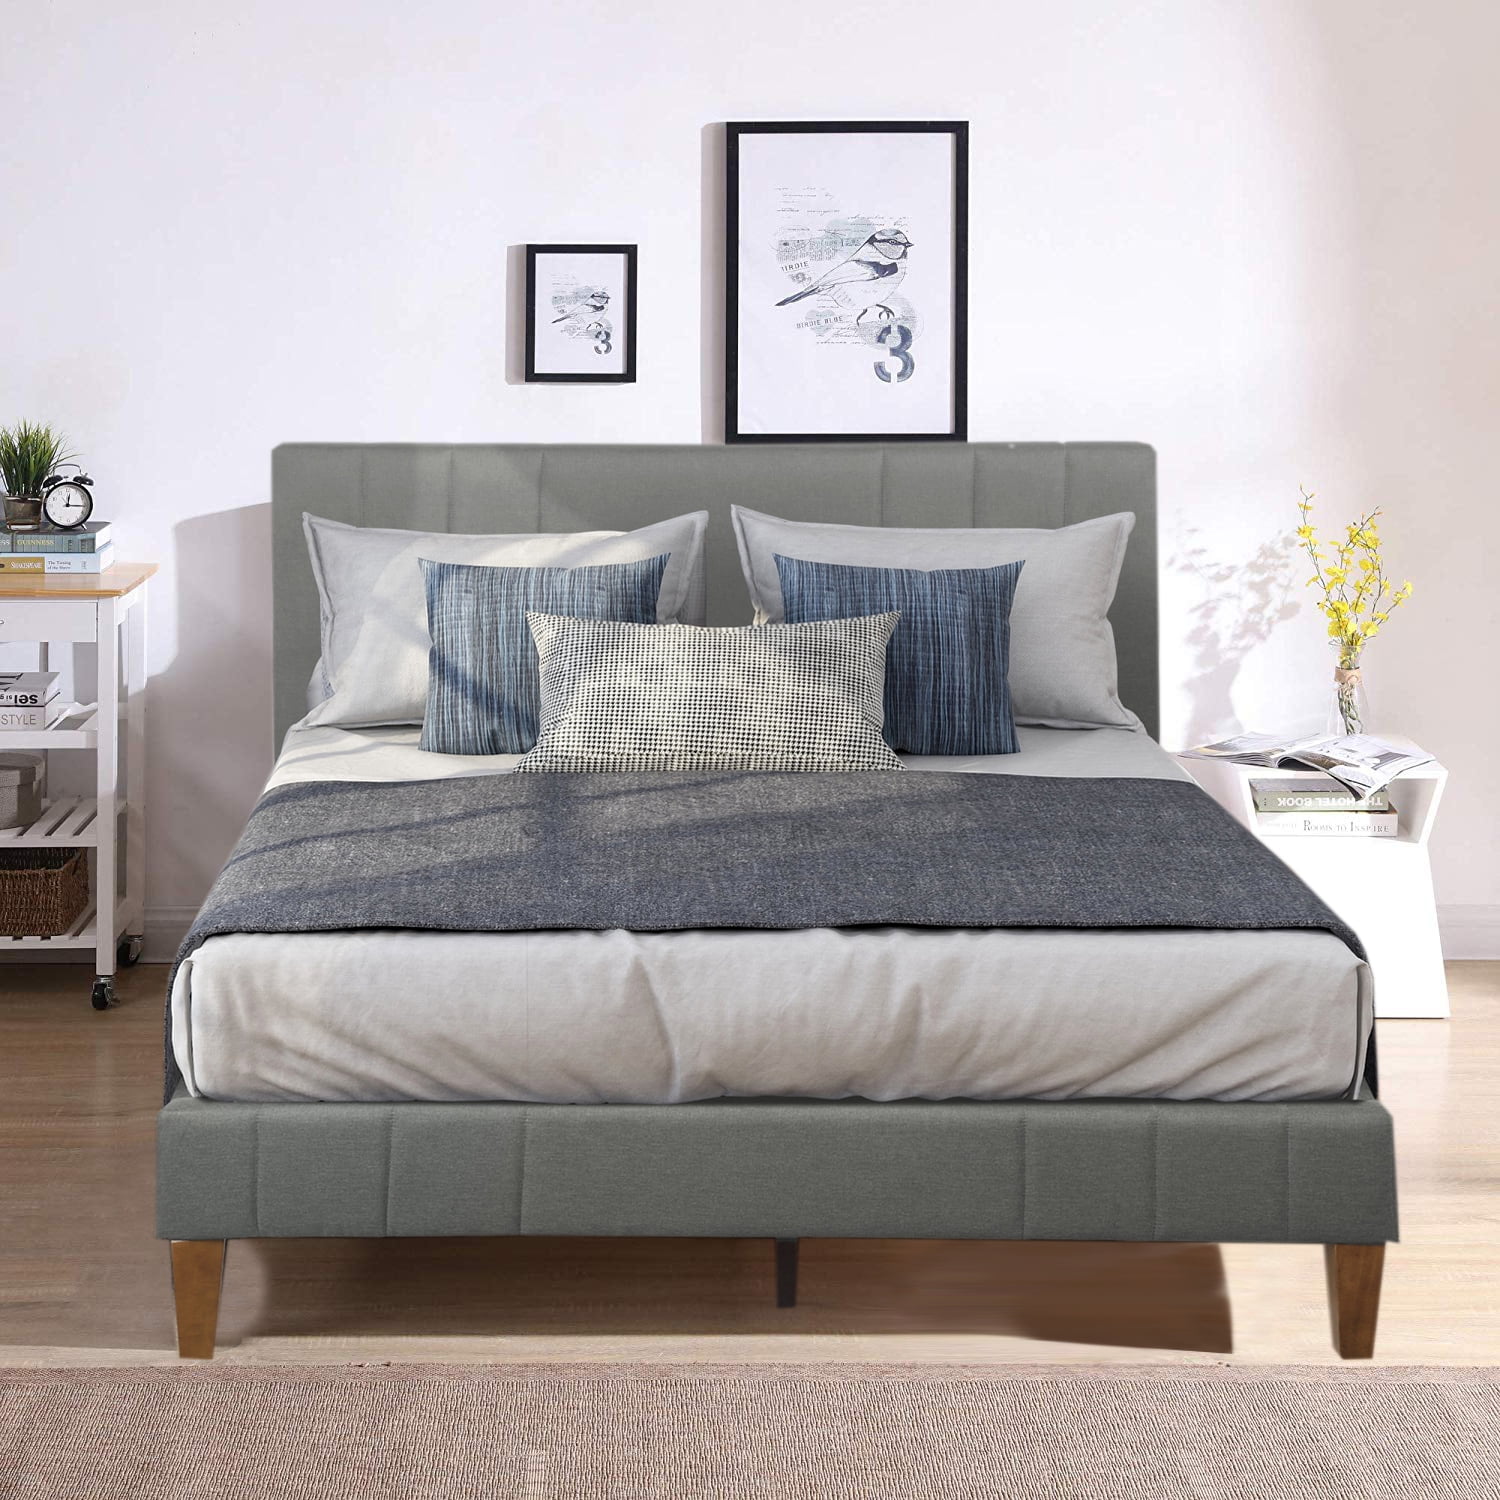 Details about    Twin/Full/Queen/King Size Platform Wood Bed Frame W/Headboard Upholstered Beds 